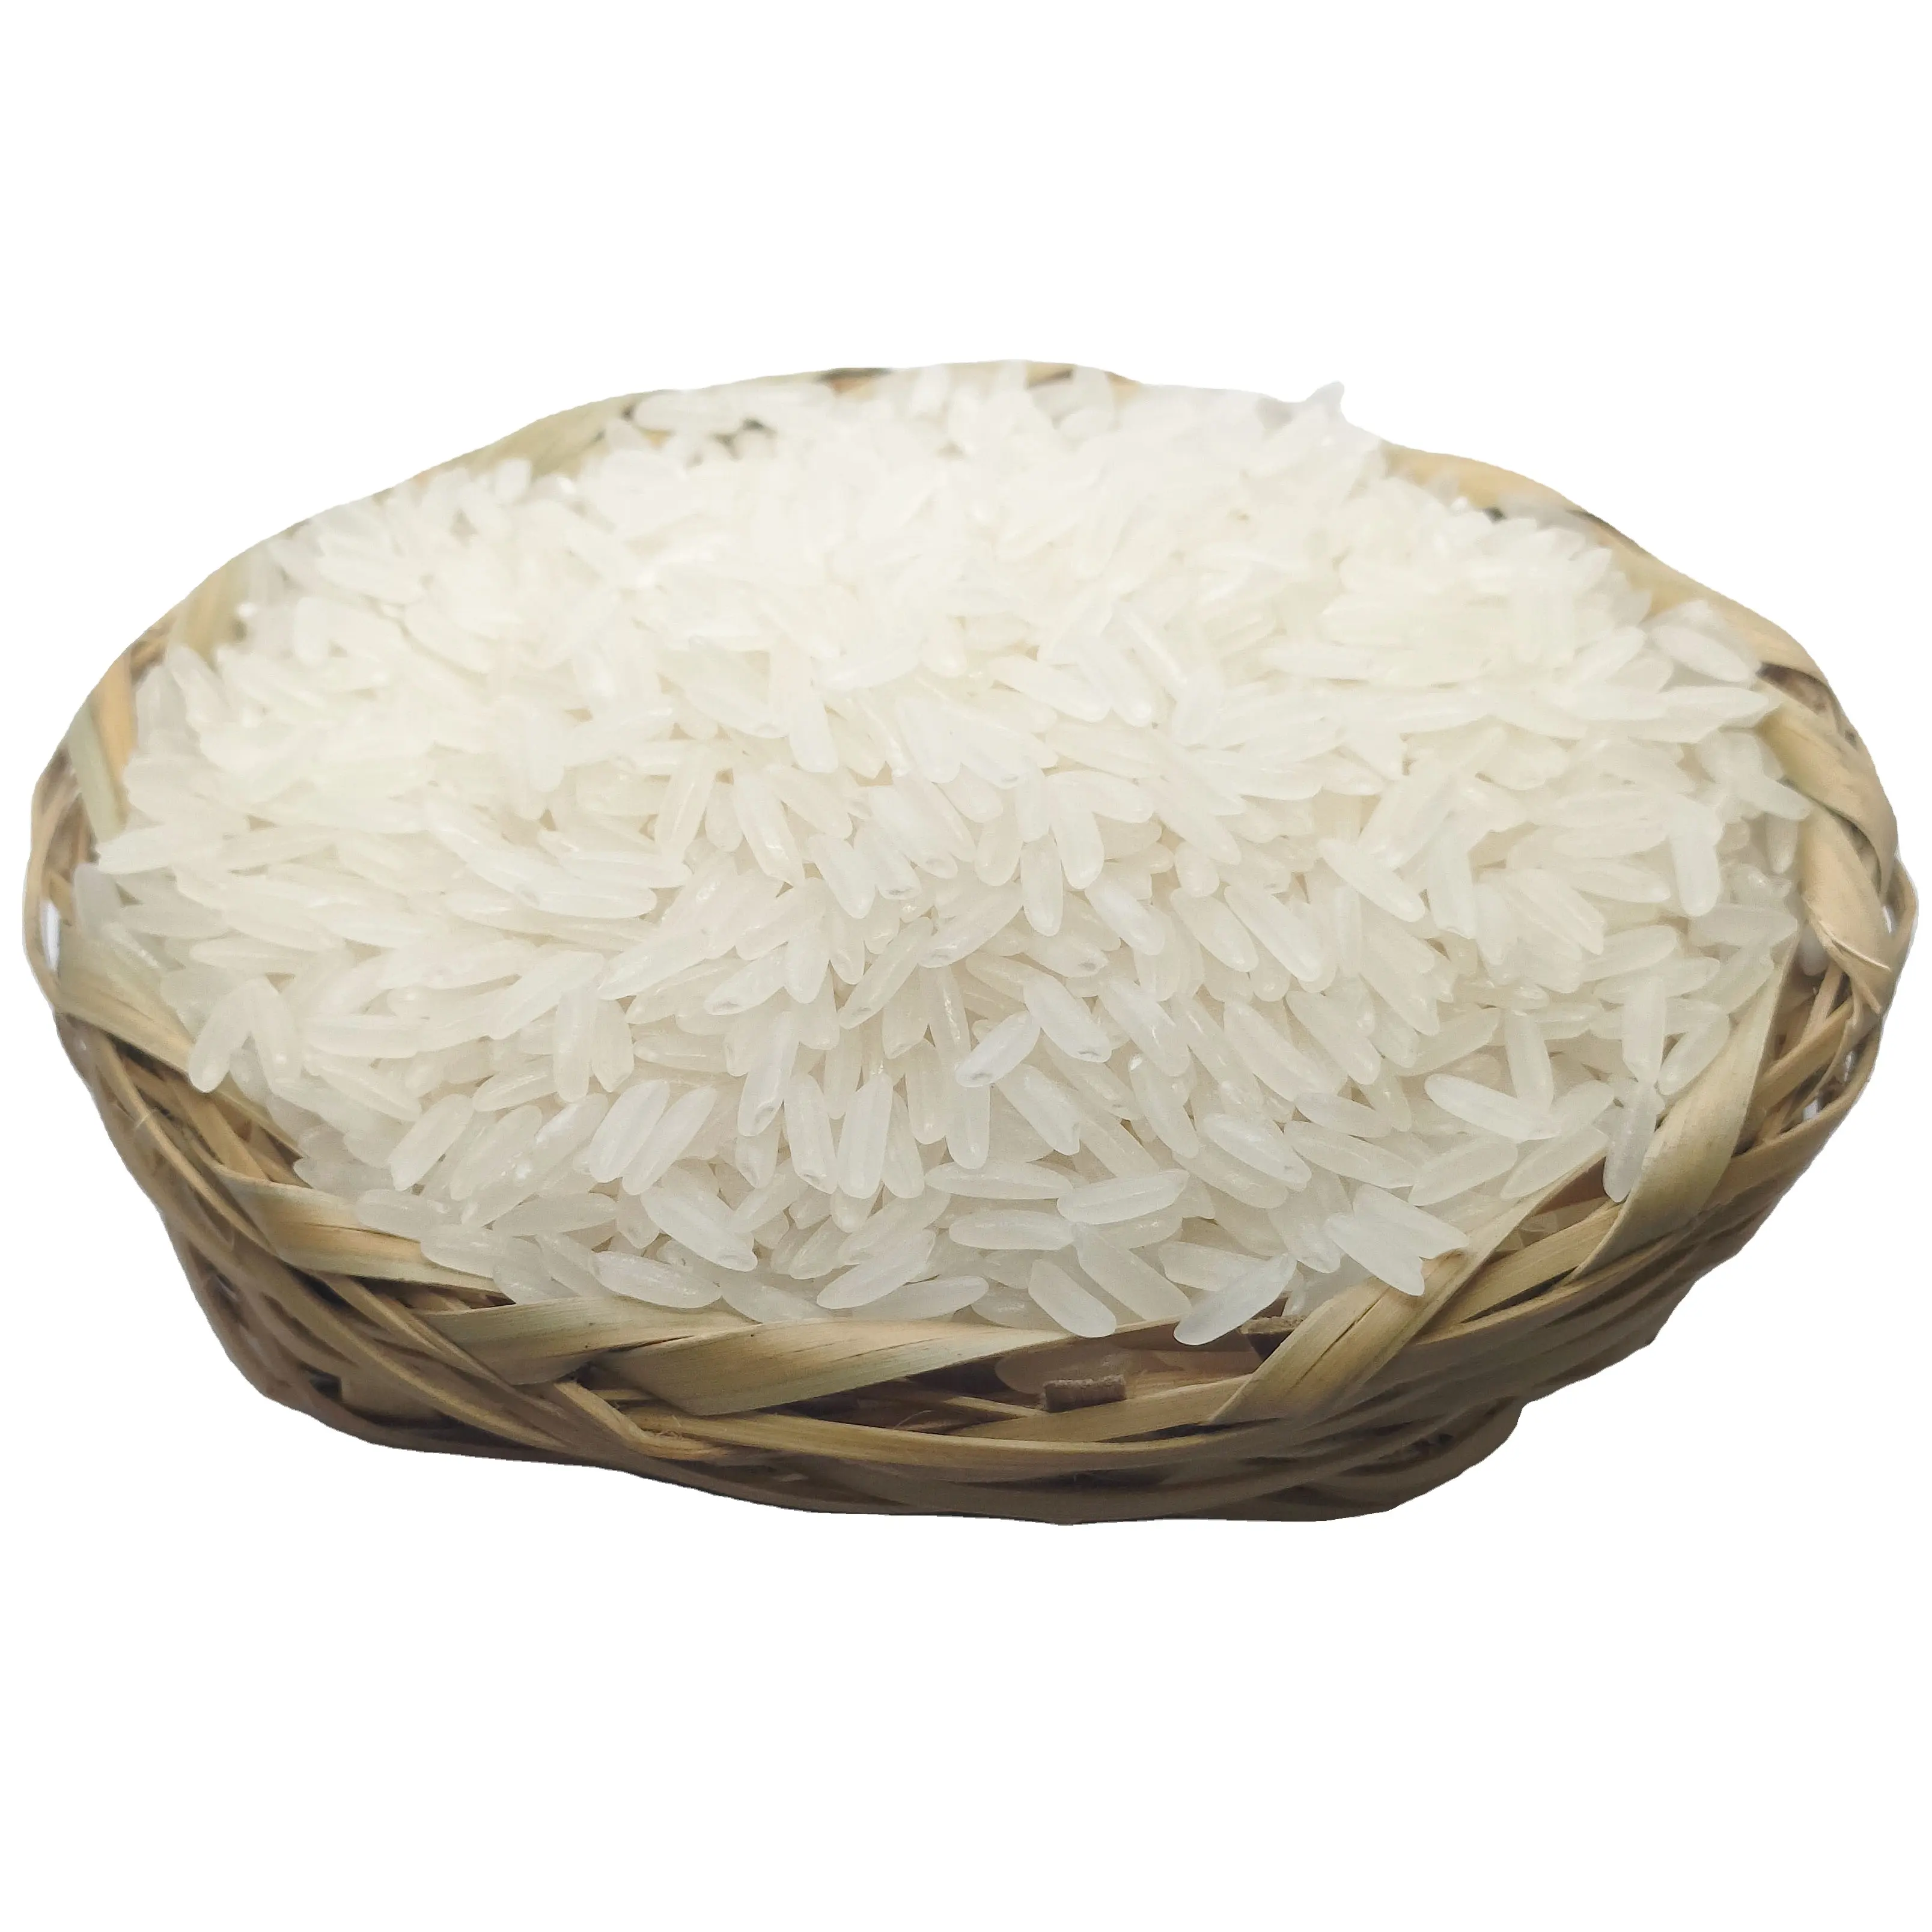 Jasmine rice premium rice produced in Vietnam, competitive price throughout the market. Contact WhatsApp +84962605191